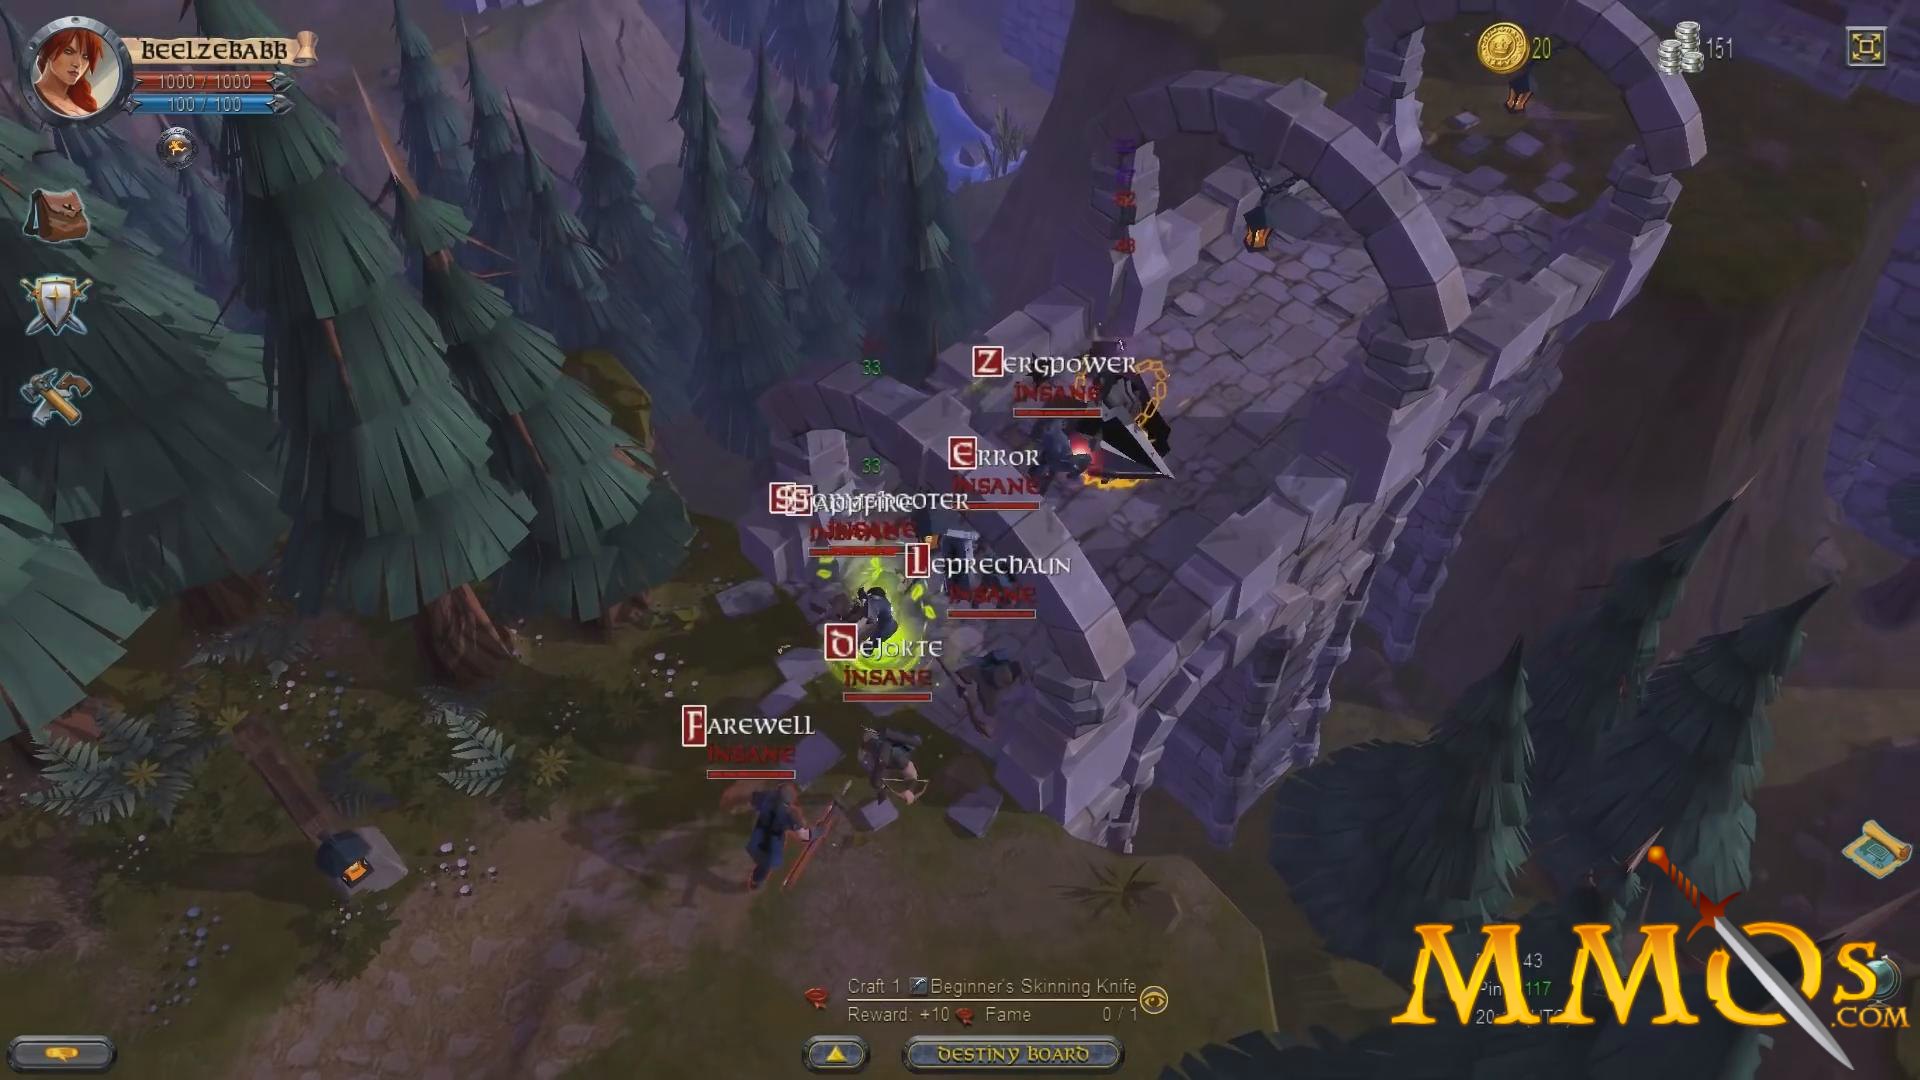 Albion Online Gameplay Second Look - MMOs.com 